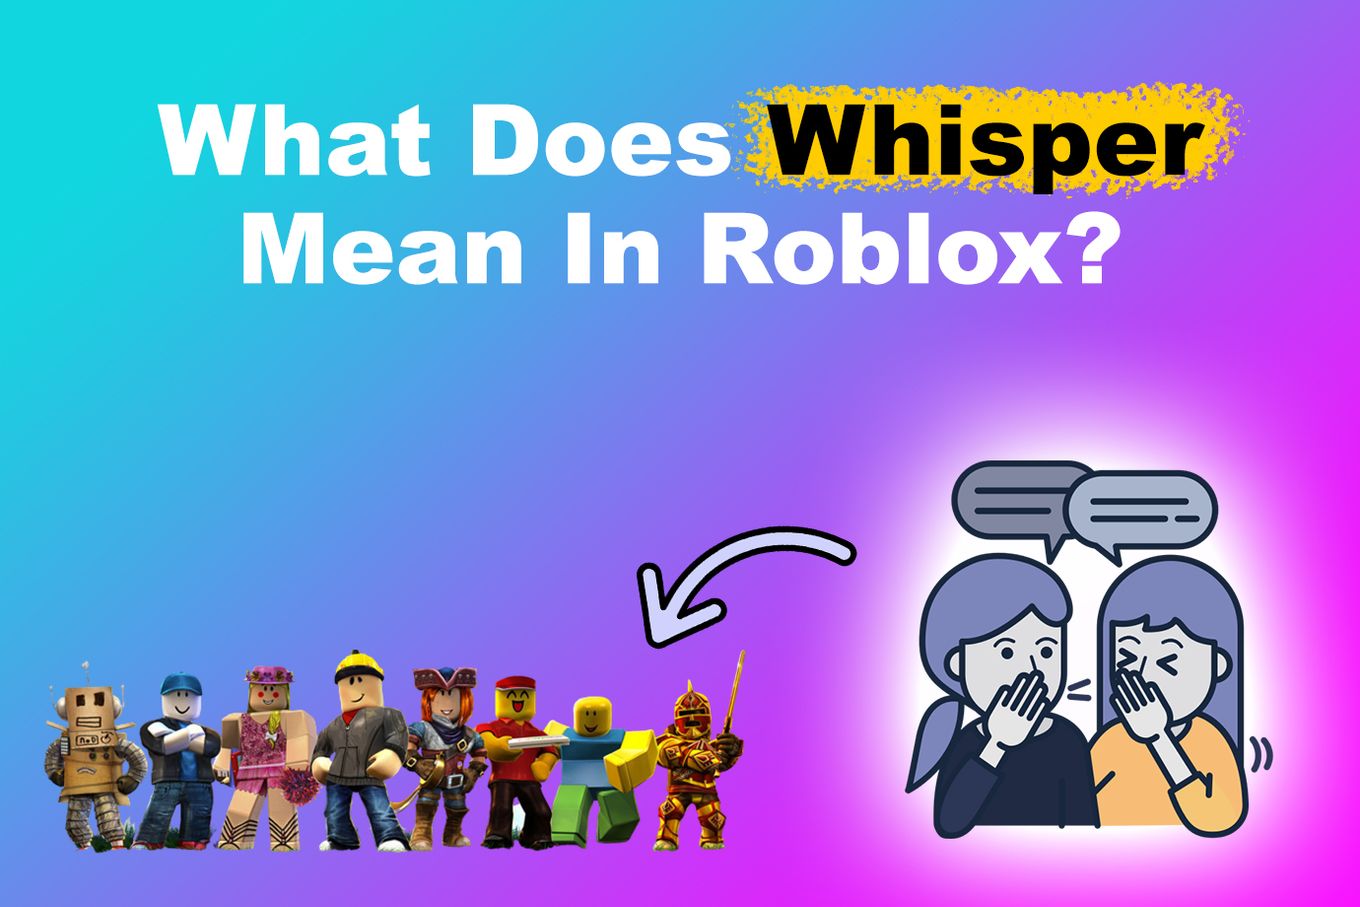 What Does Whisper Mean In Roblox?